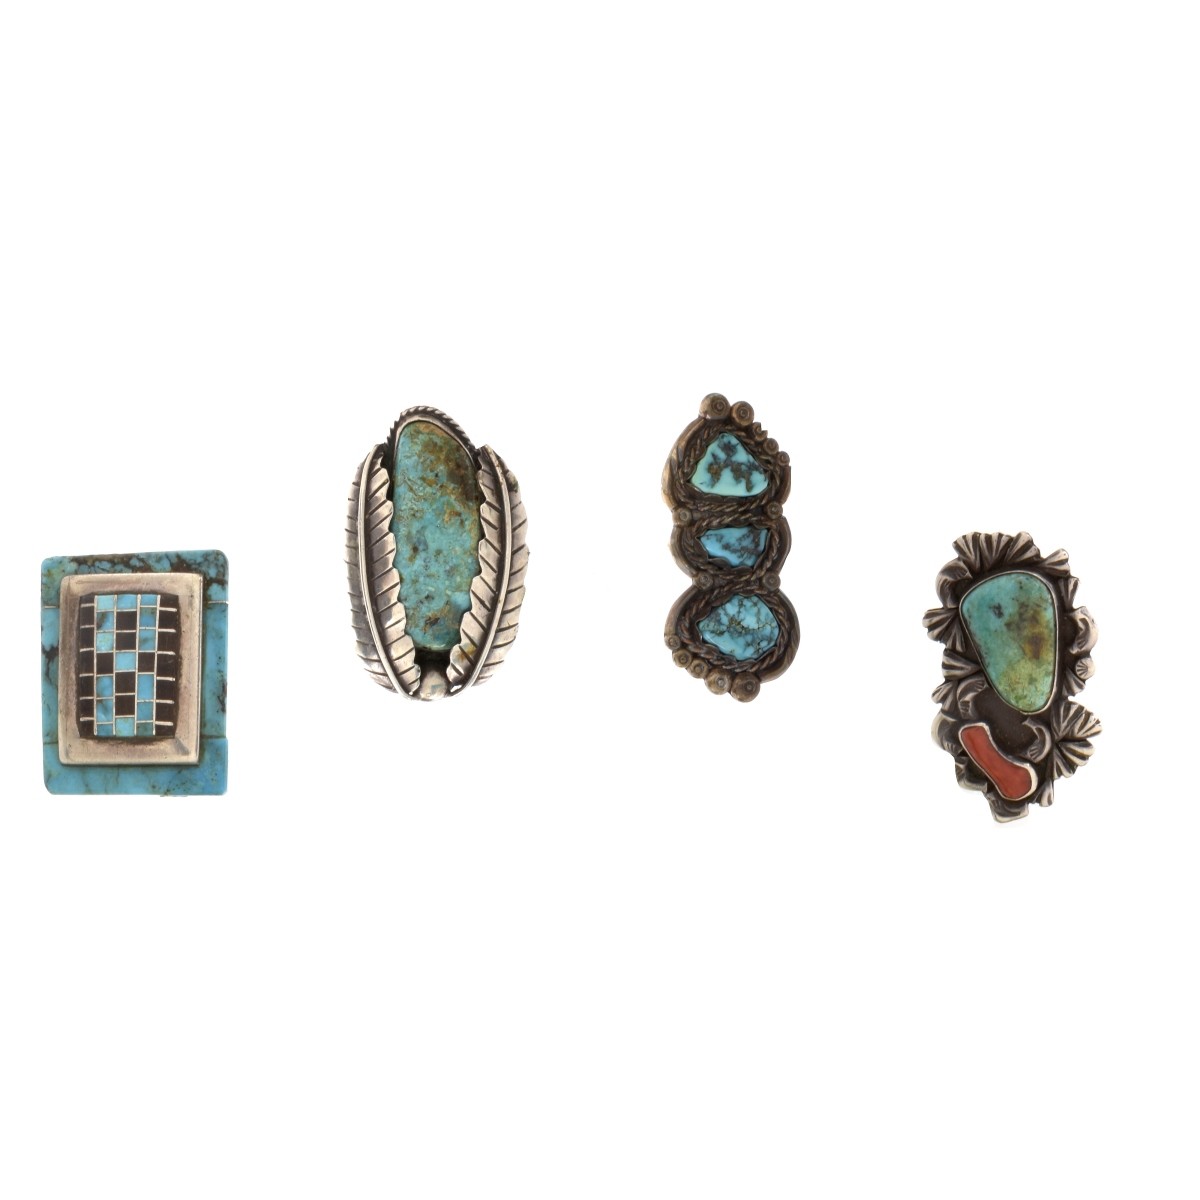 Five Piece Turquoise and Silver Jewelry